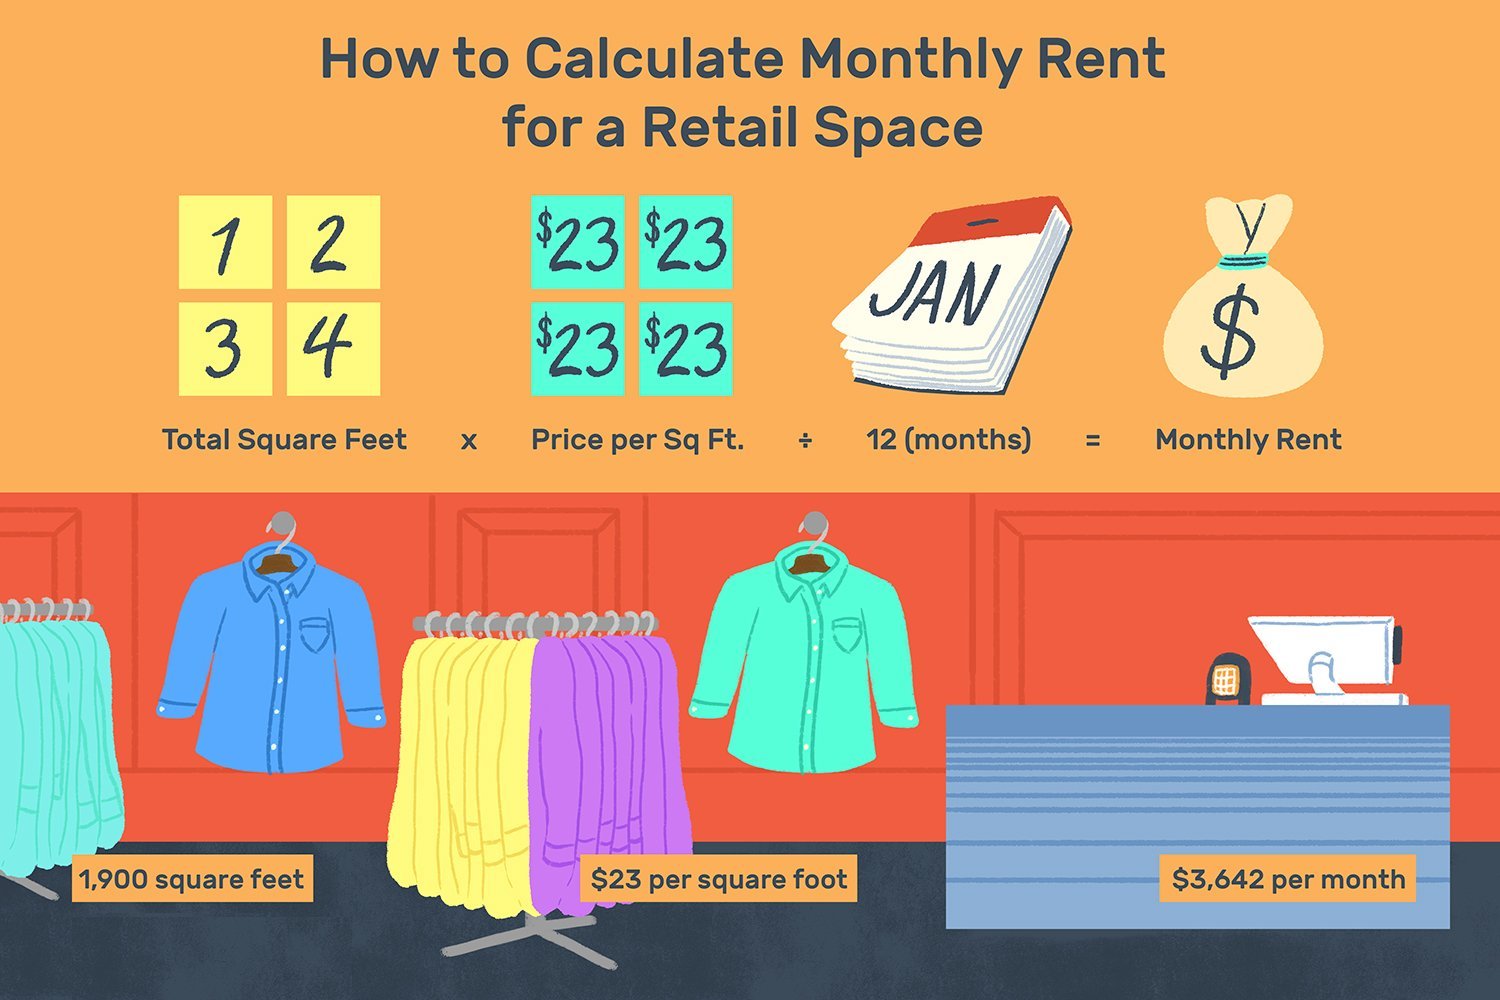 Retail Space & Small Businesses: How to Determine Your Value Per